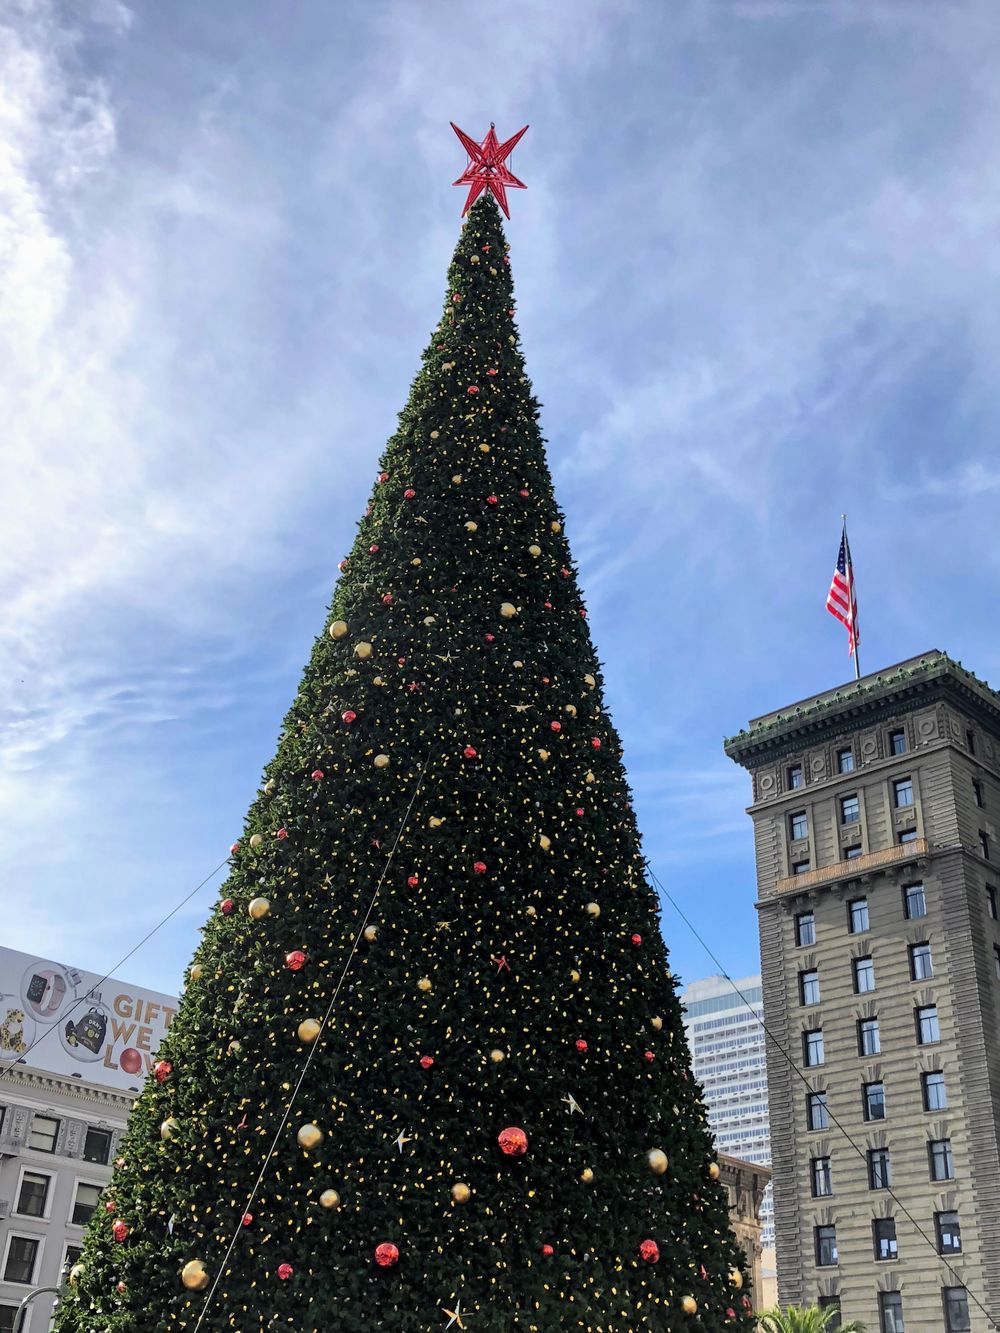 Out & About: There's no Place Like the Bay Area for the Holidays